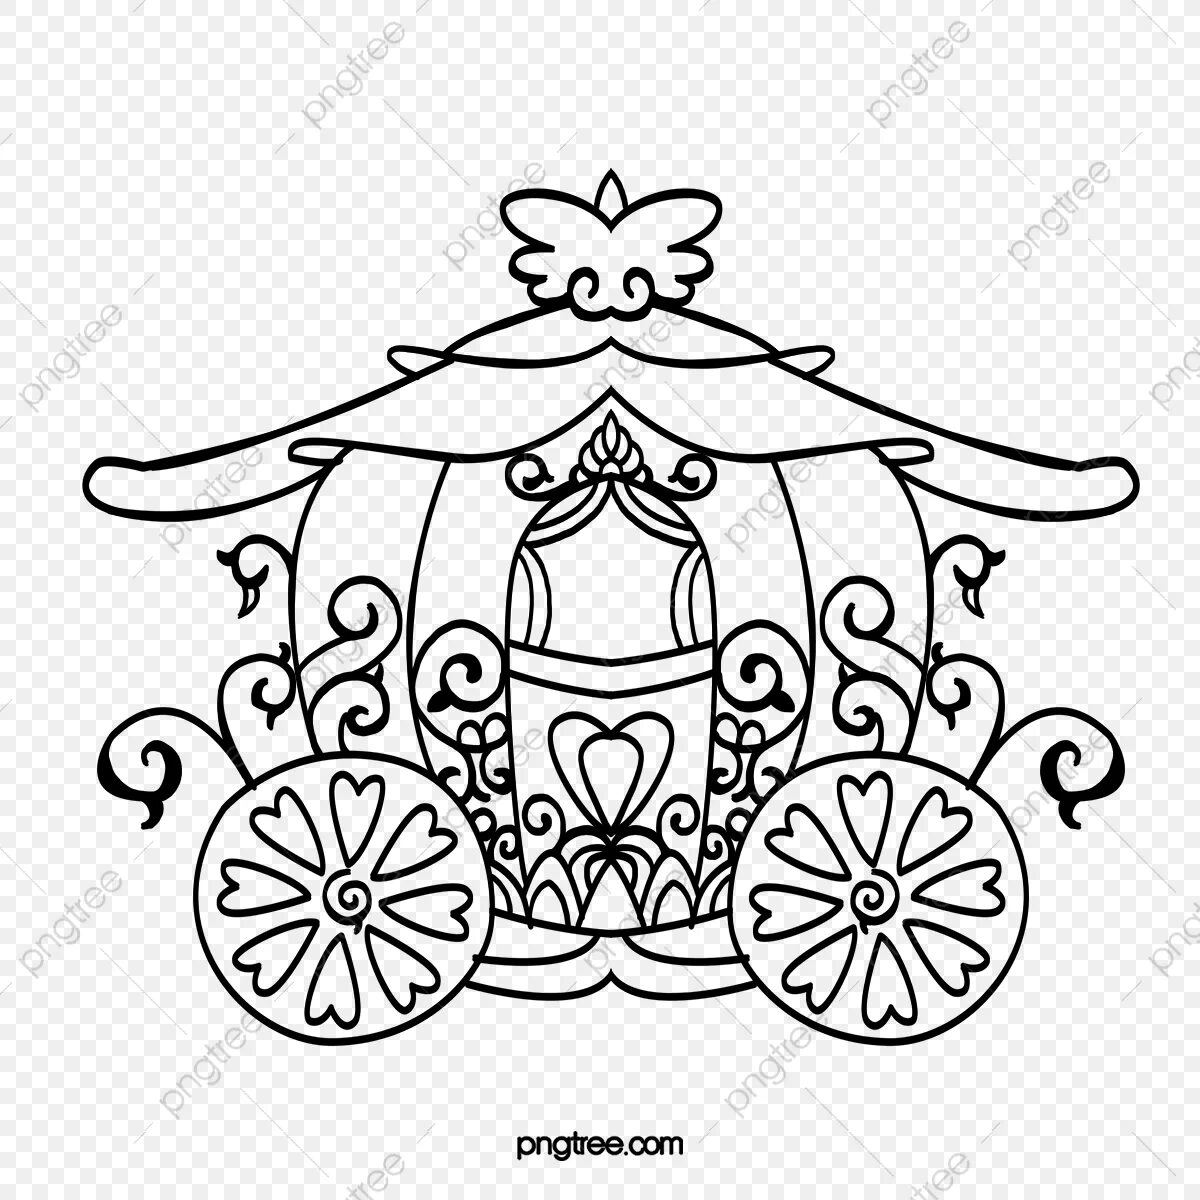 Coloring book luminous carriage for children